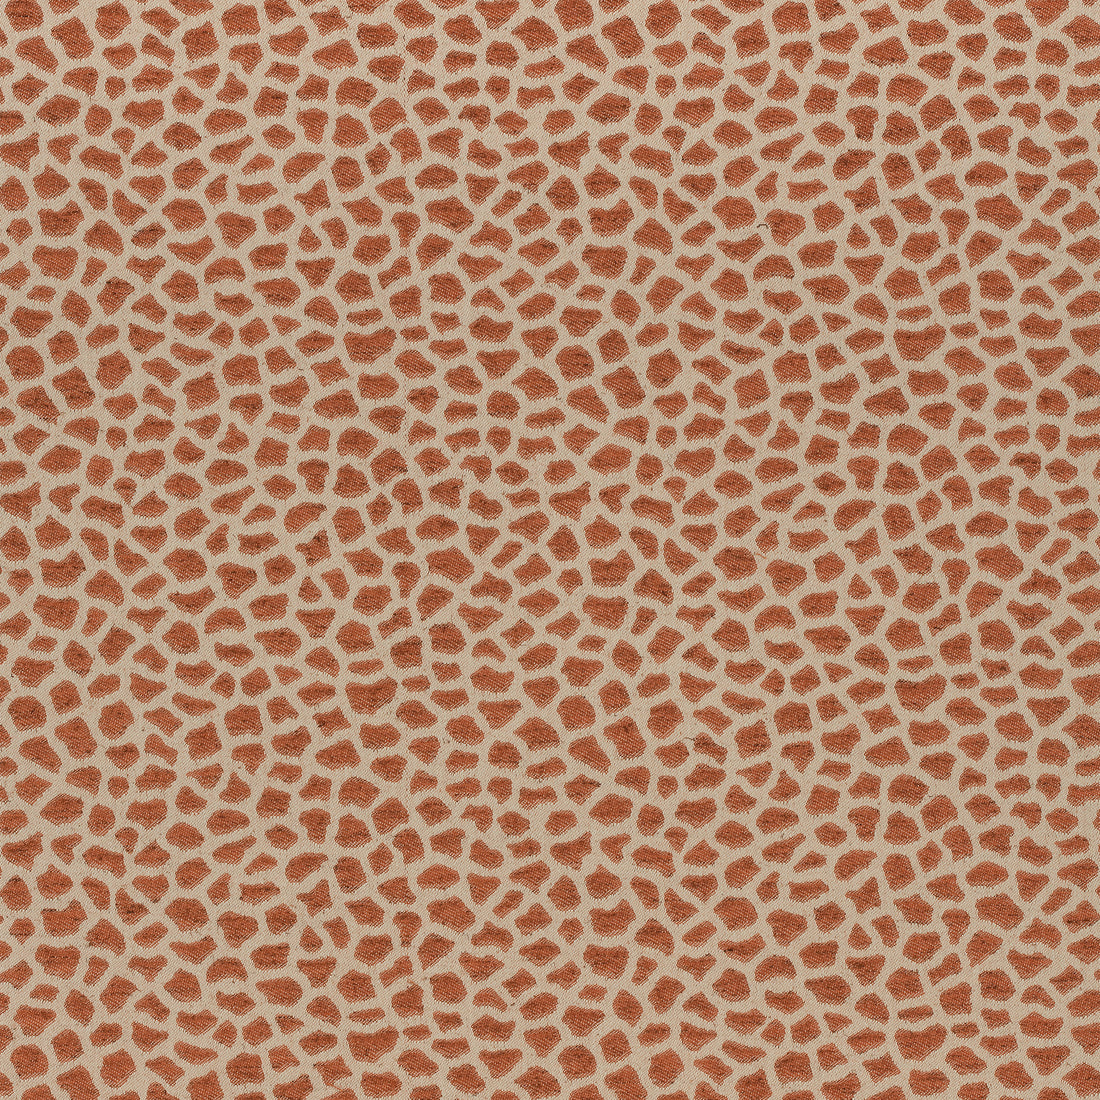 Masai fabric in terracotta color - pattern number W80424 - by Thibaut in the Woven Resource Vol 10 Menagerie collection